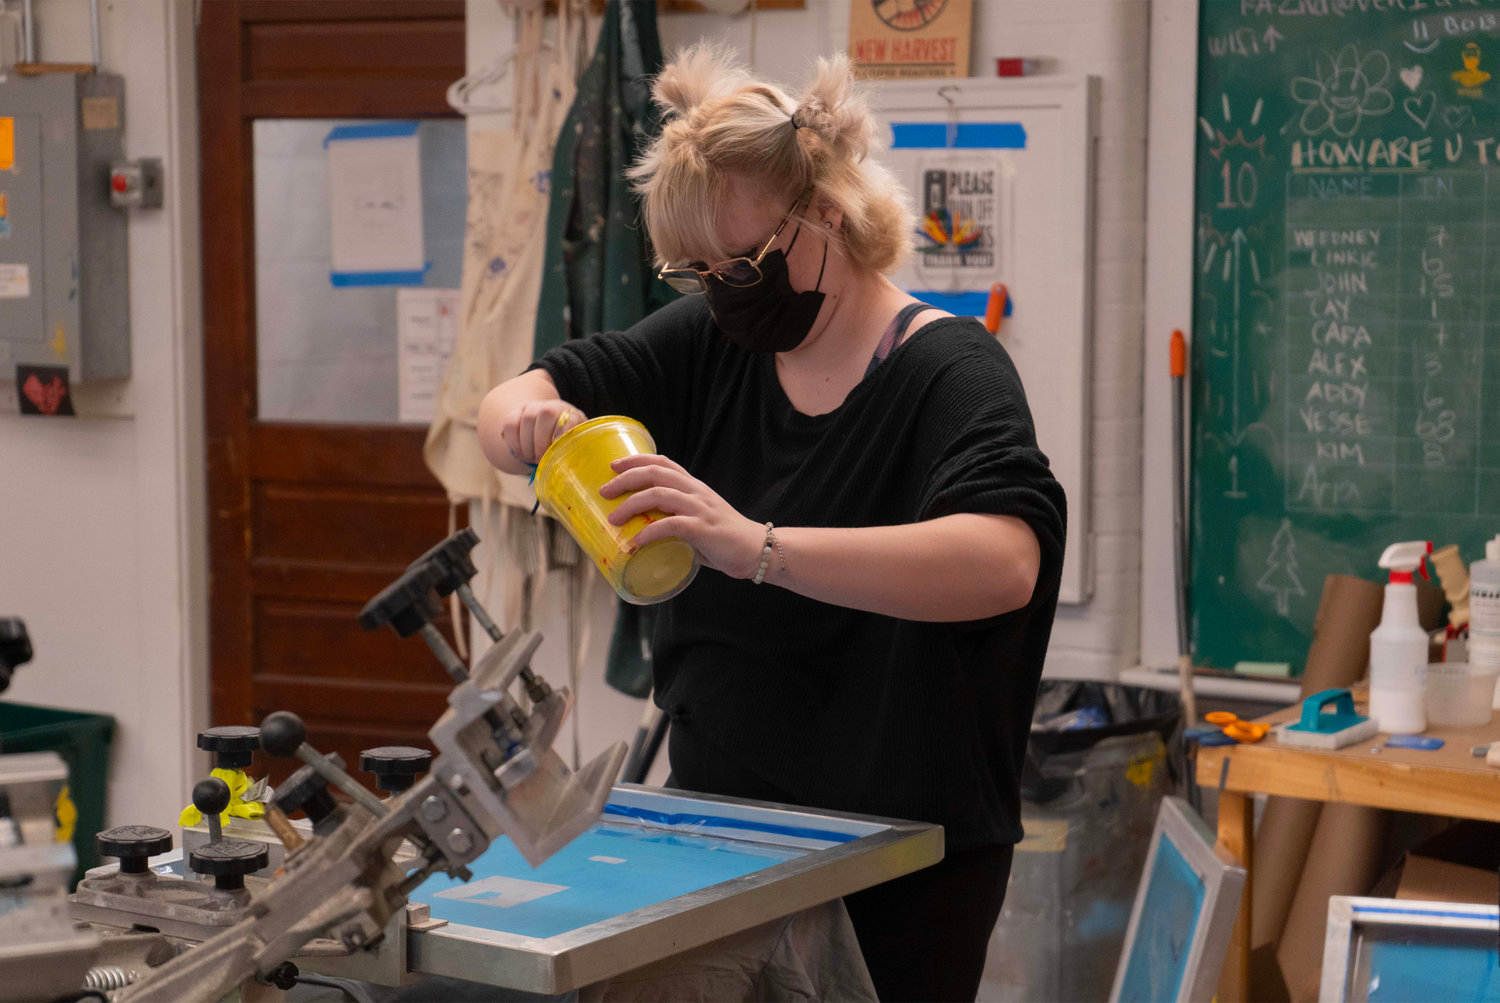 Riverzedge student Cay mixing ink for a screenprinting project